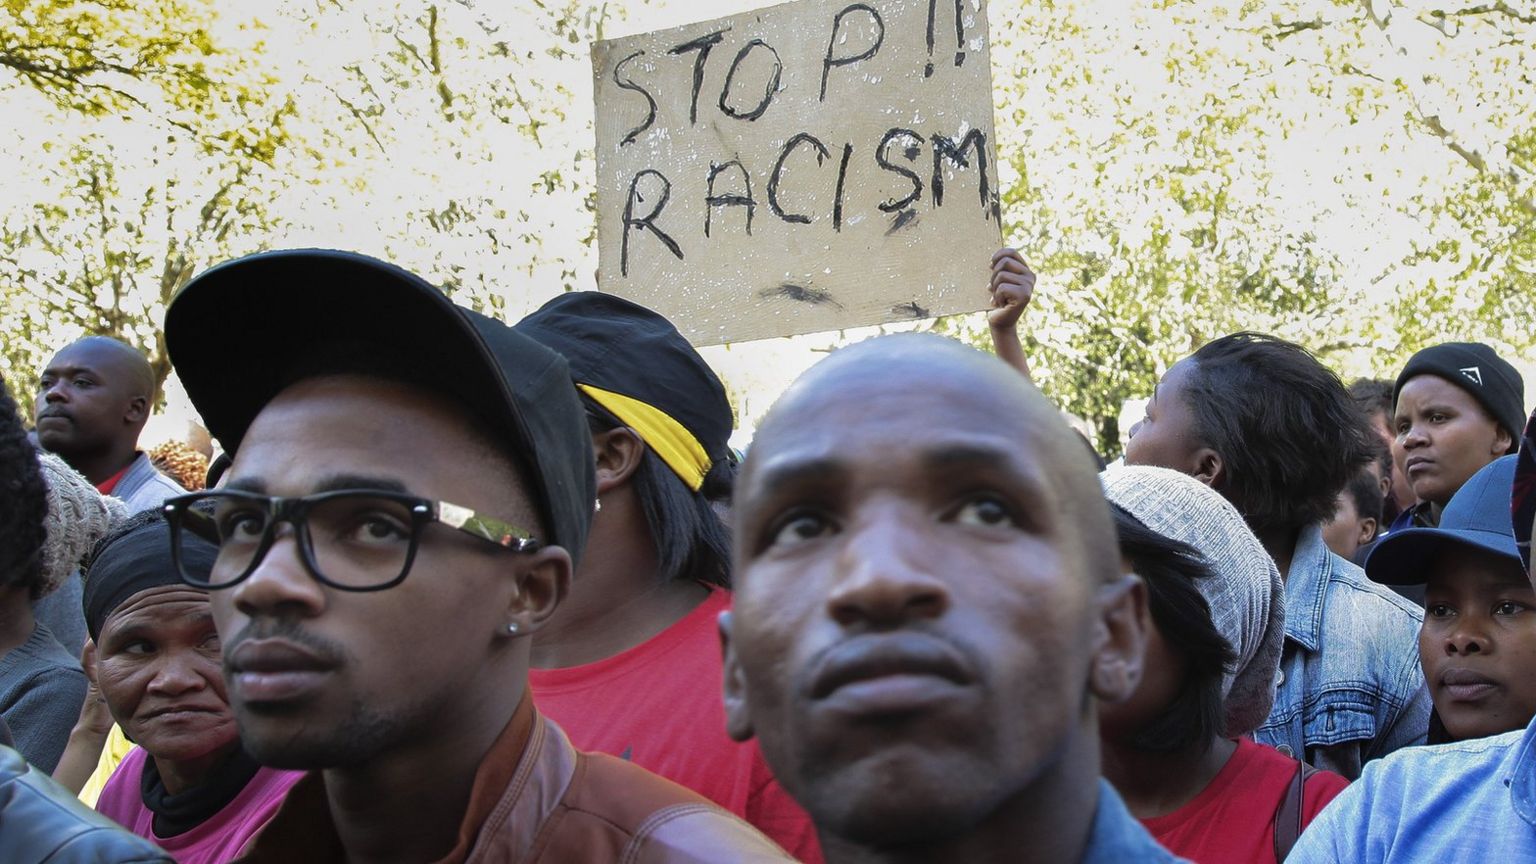 South African Students protest against alleged racism and the language policy at Stellenbosch University (SU), on 18 September, 2015.